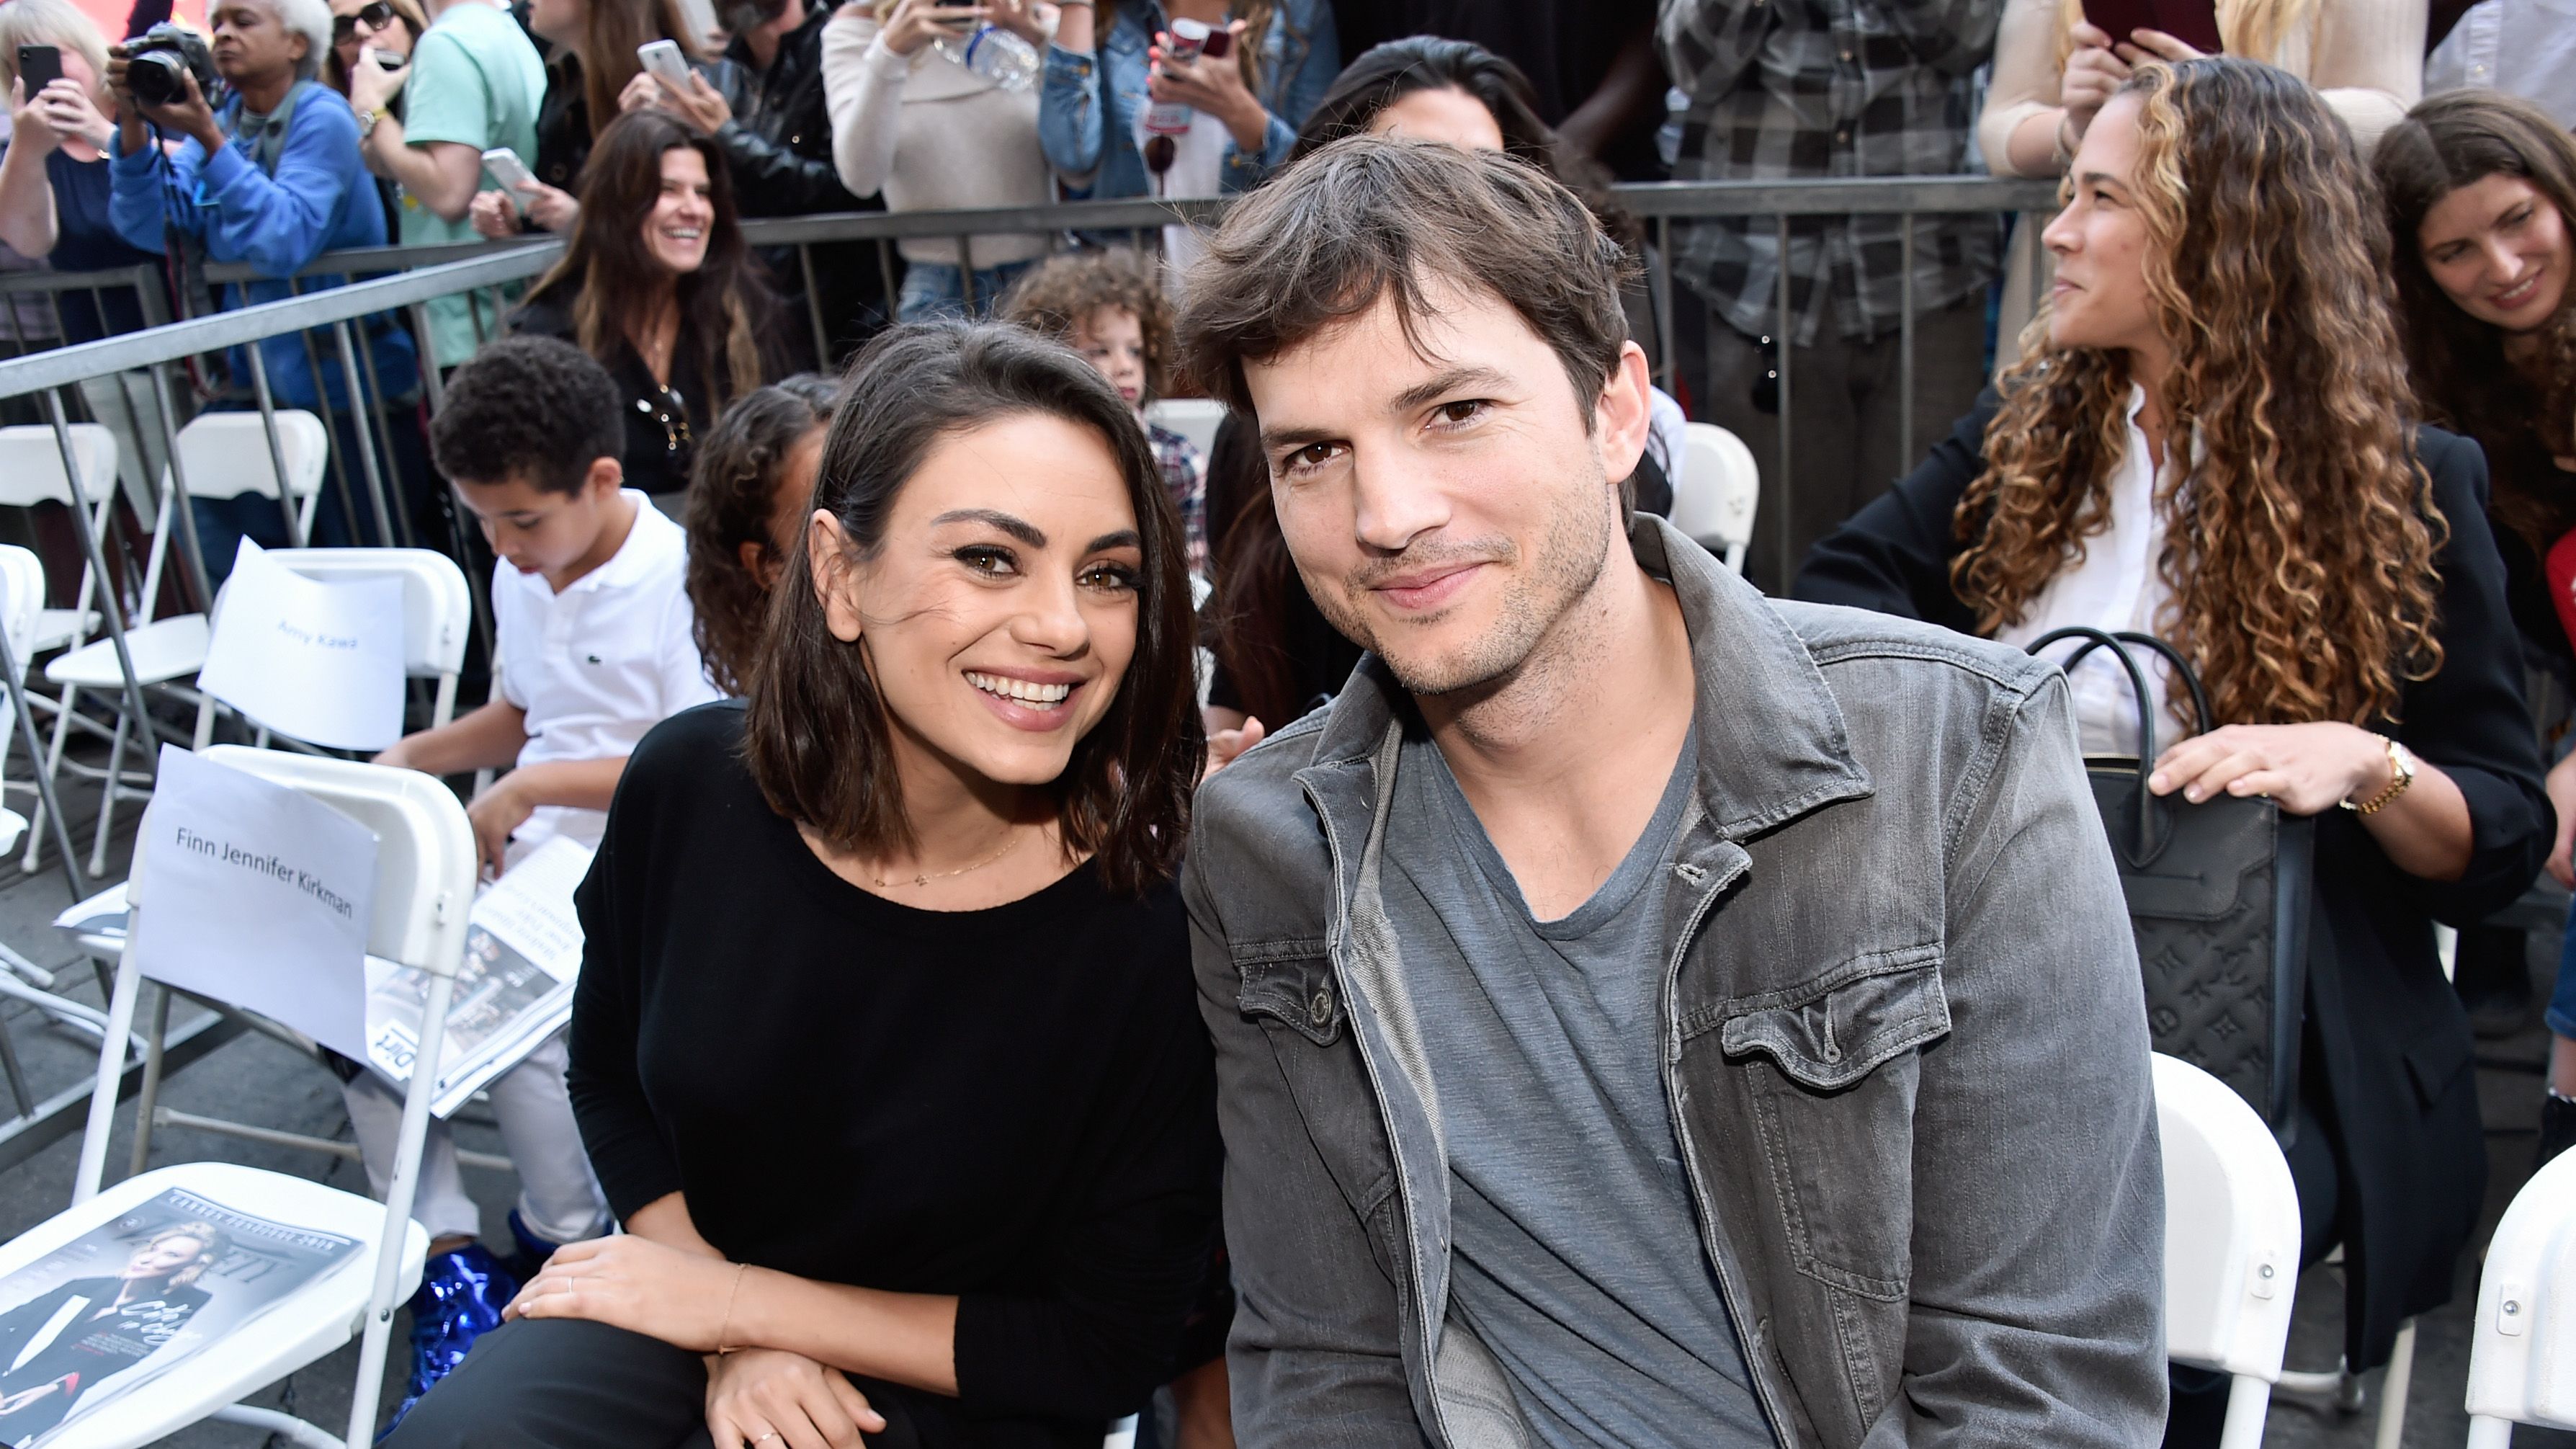 Ashton Kutcher on Mila Kunis and His First Kiss on 'That '70s Show' and Off  - Ashton on Who Made First Move